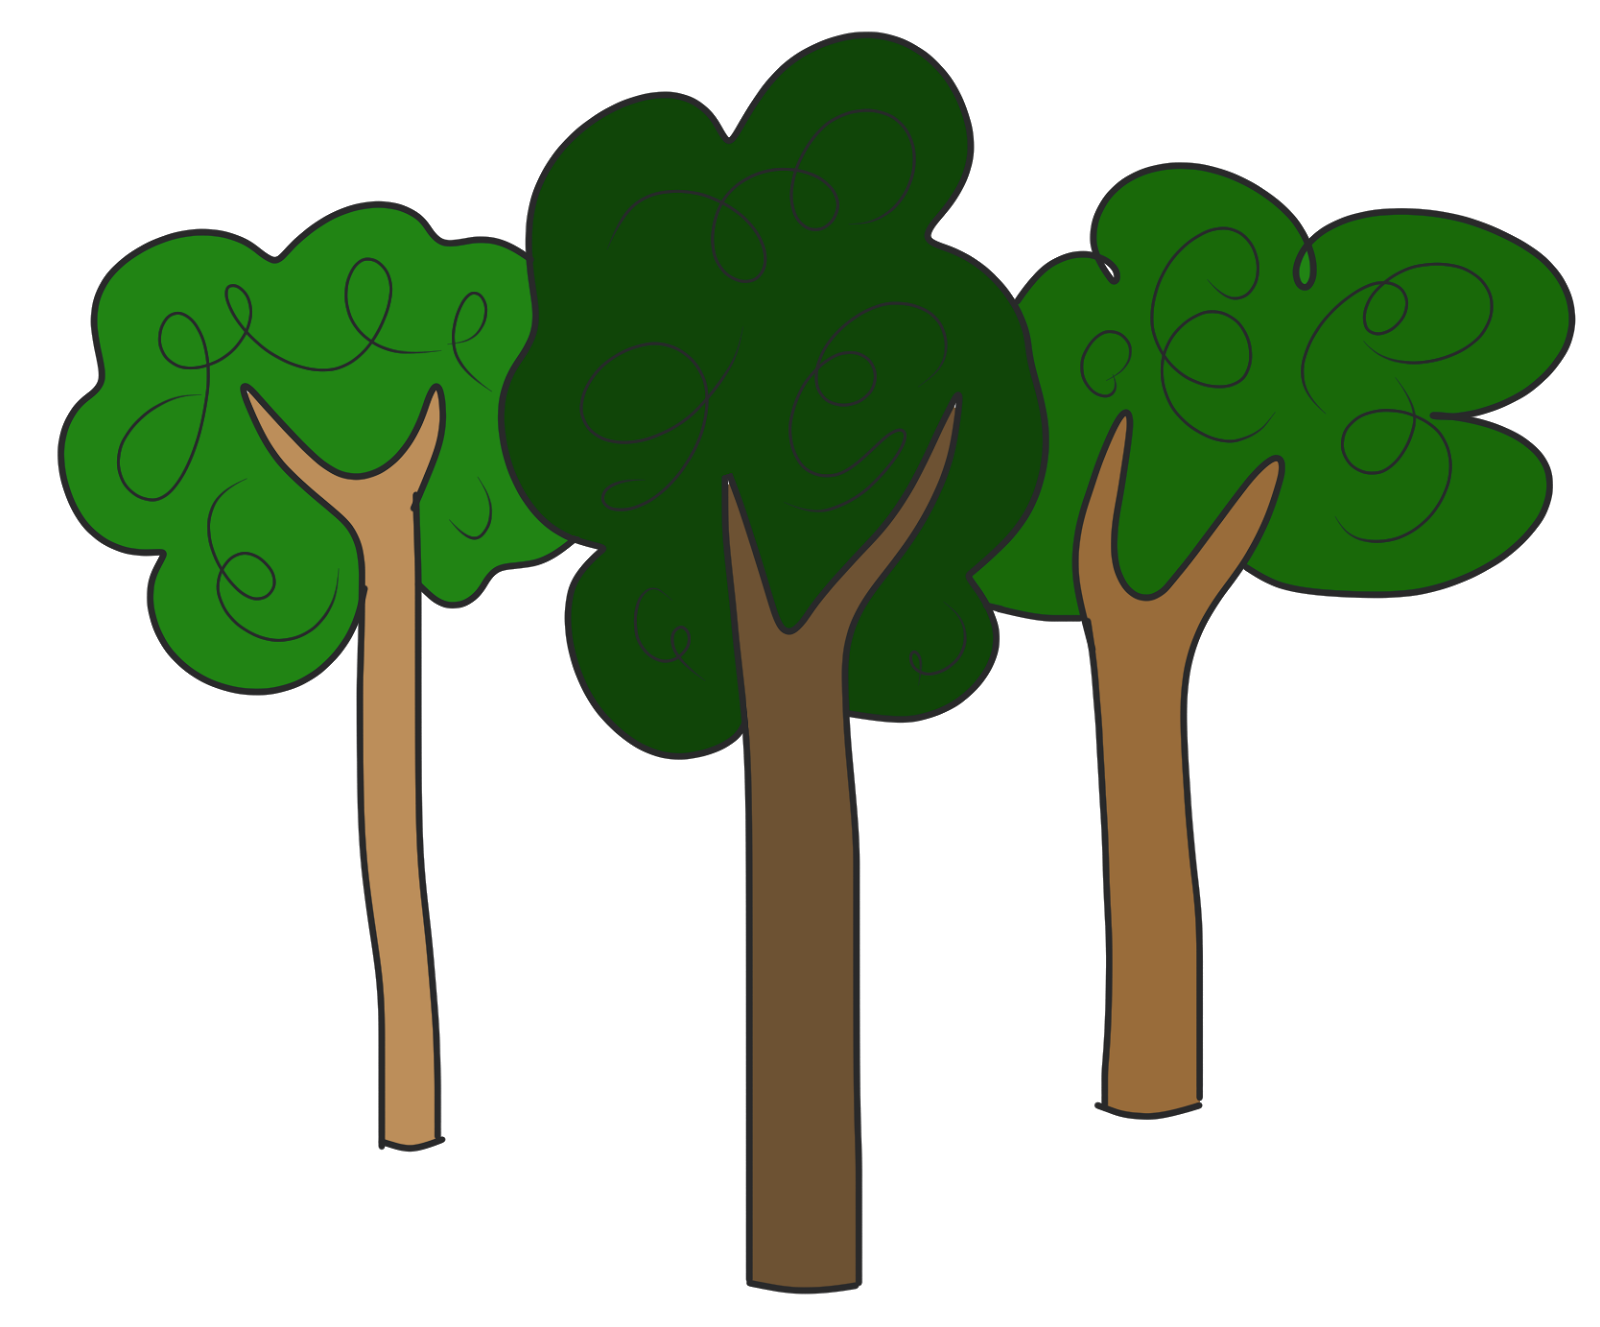 Forest trees clipart free clipart images 2.